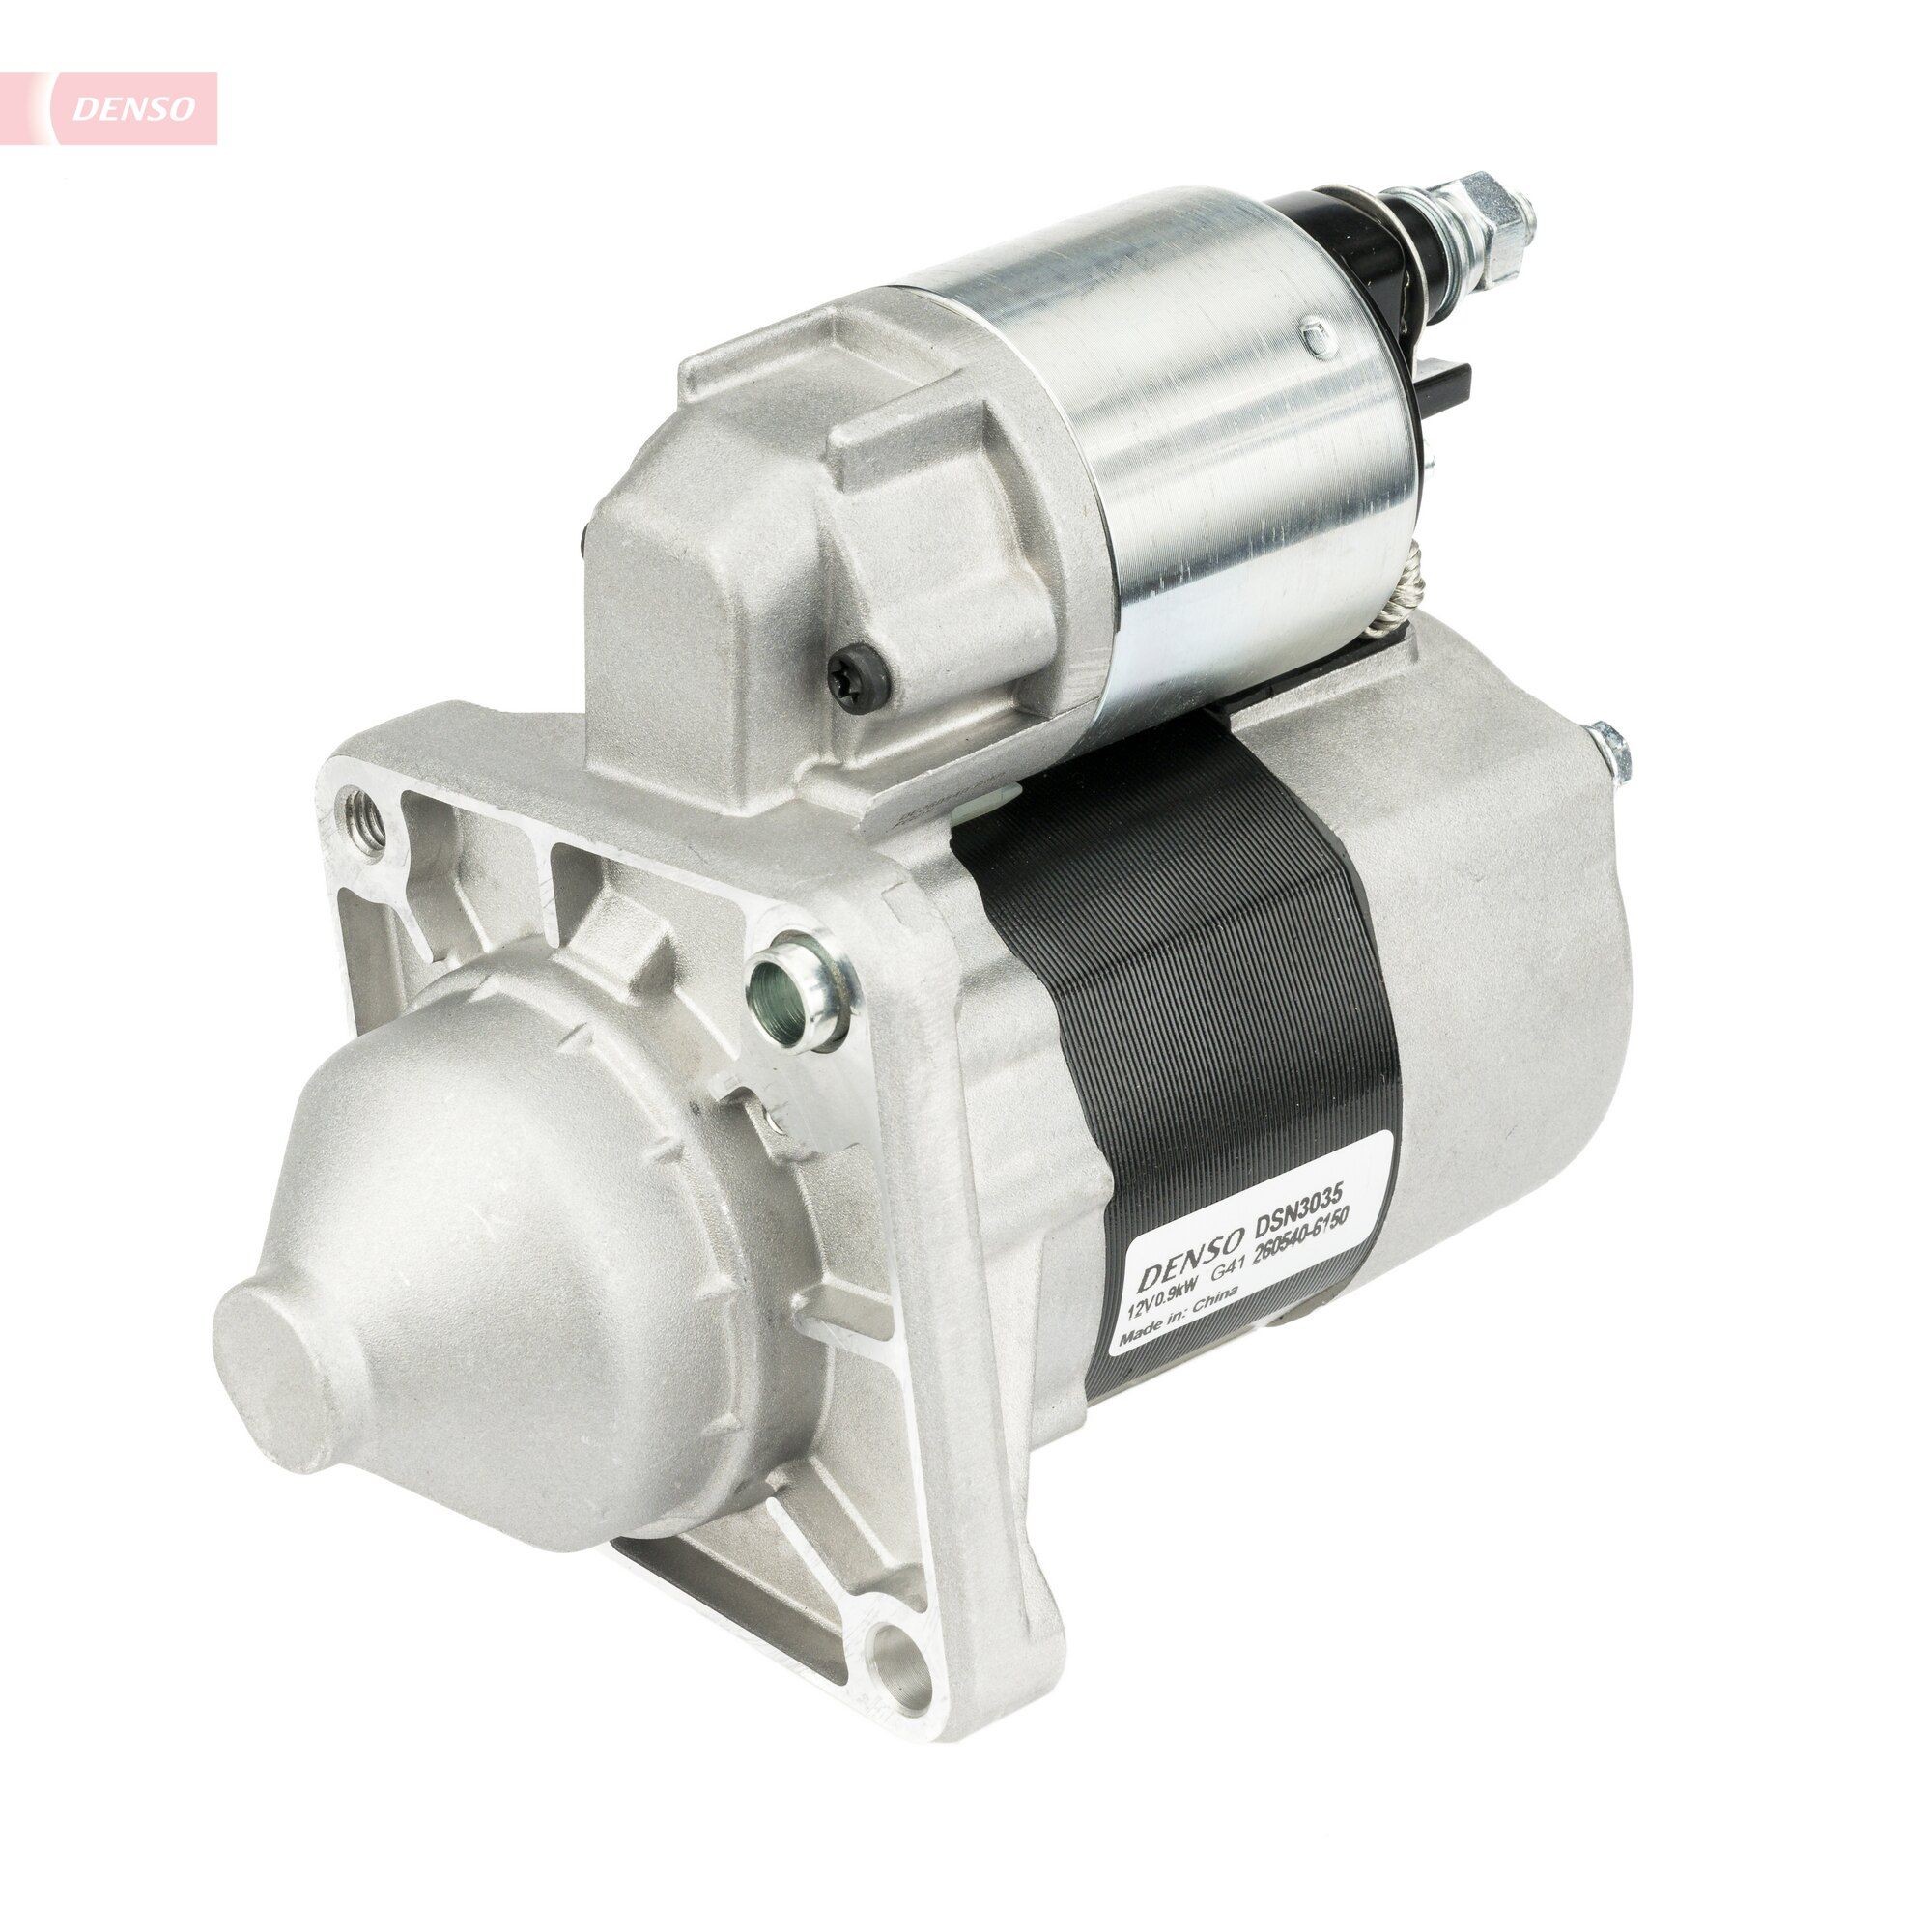 DENSO DSN3035 Starter motor JEEP experience and price